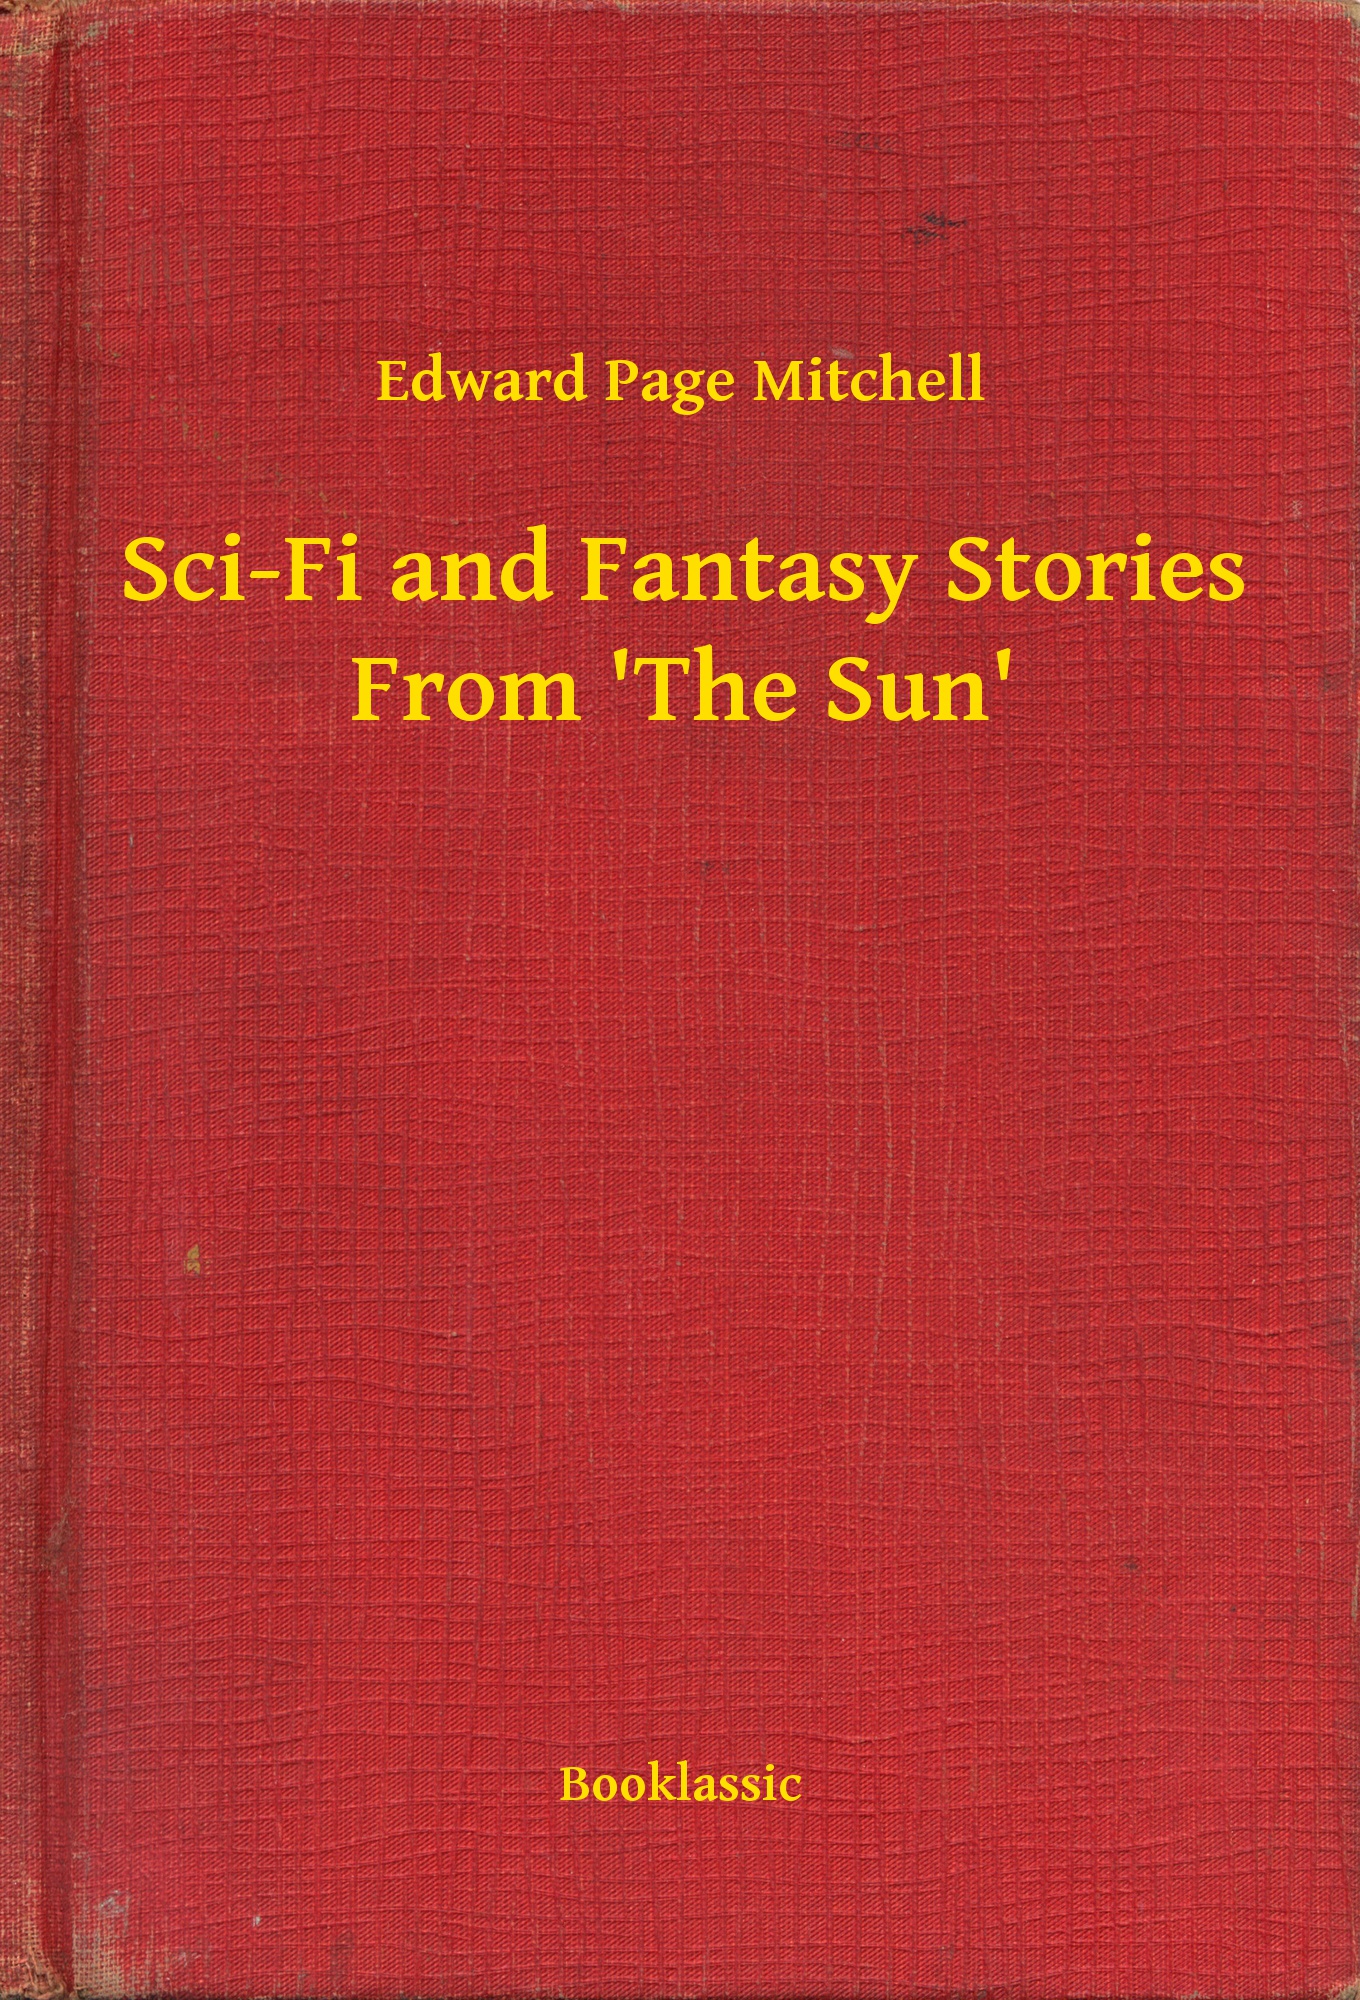 Sci-Fi and Fantasy Stories From "The Sun"